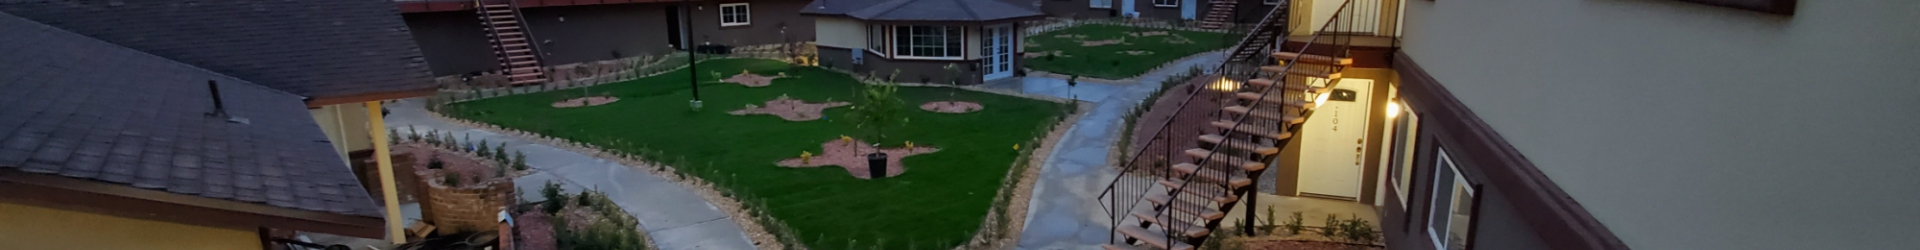 Best Residential Lawn Services Fresno, Clovis, Madera, Reedley